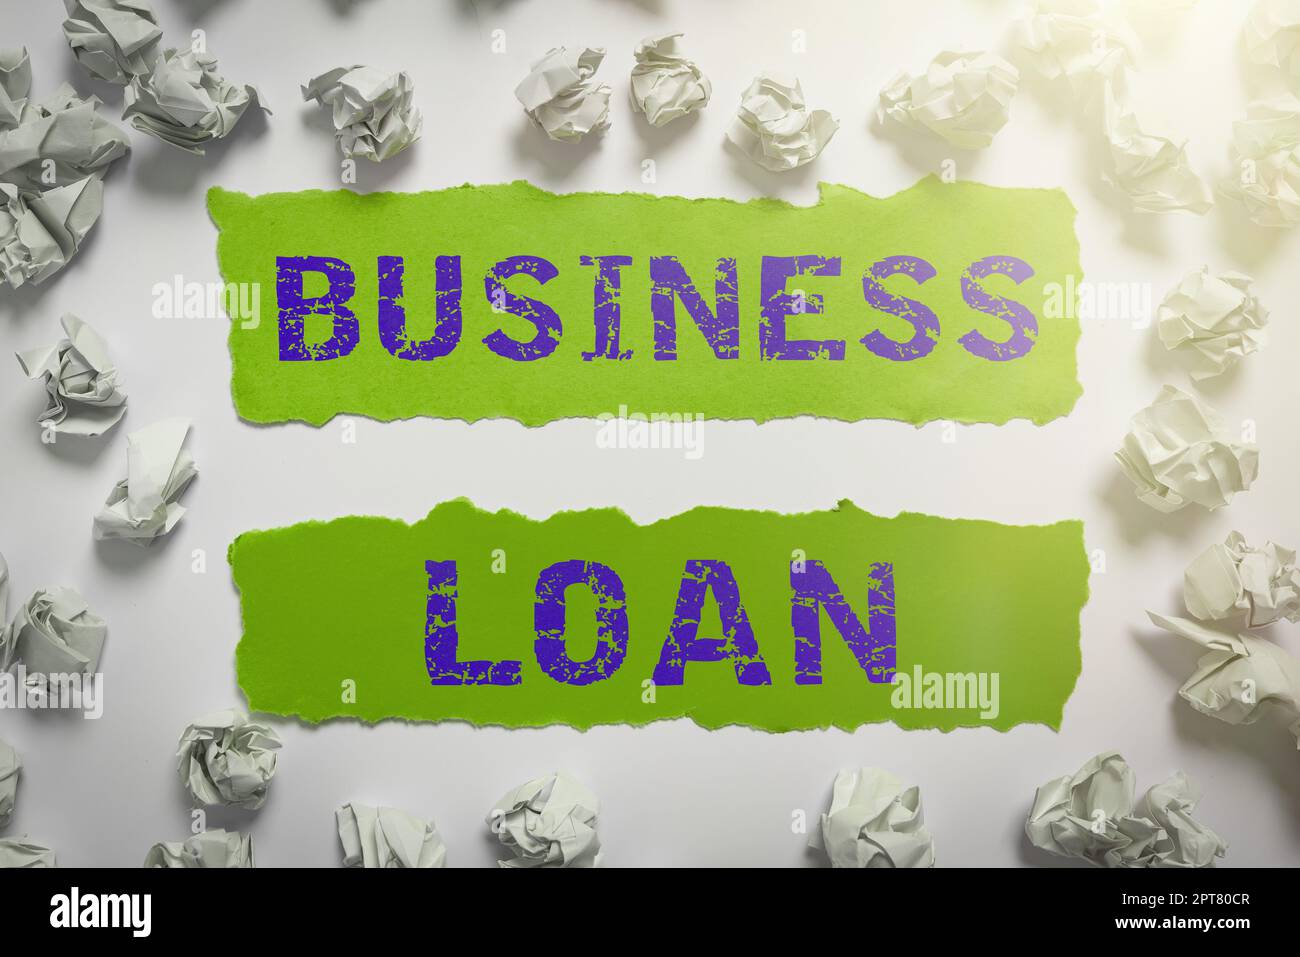 Writing displaying text Business Loan, Business idea Credit Mortgage Financial Assistance Cash Advances Debt Stock Photo